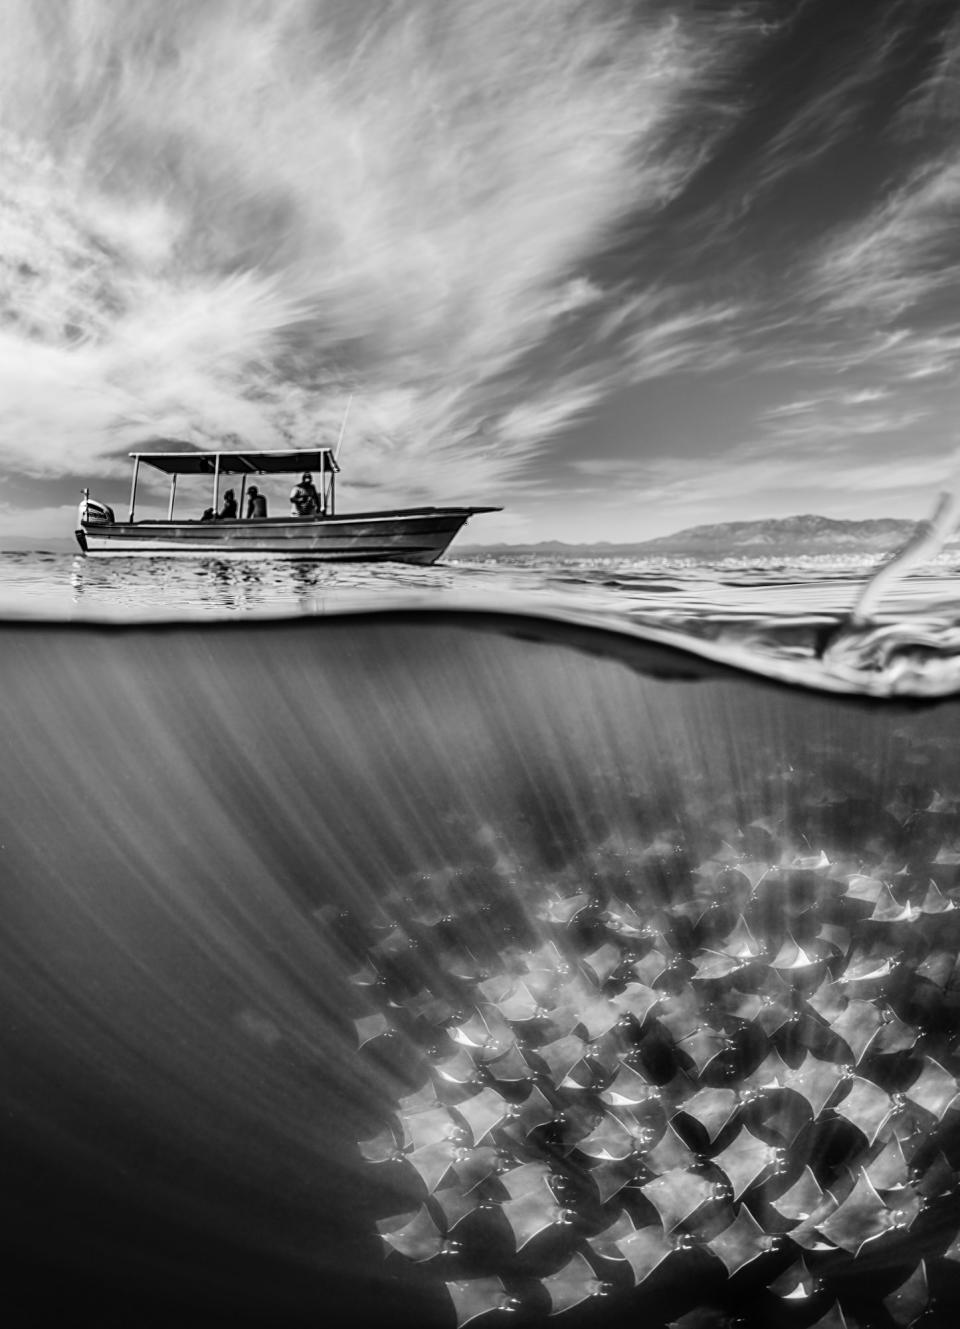 Winner, Nature, Wildlife, and Conservation portfolio <em>(Martin Broen, USA)</em>: “A split shot of a Mobula ray fever cruising below the divers’ boat as part of their annual migration in the waters of Baja California.”